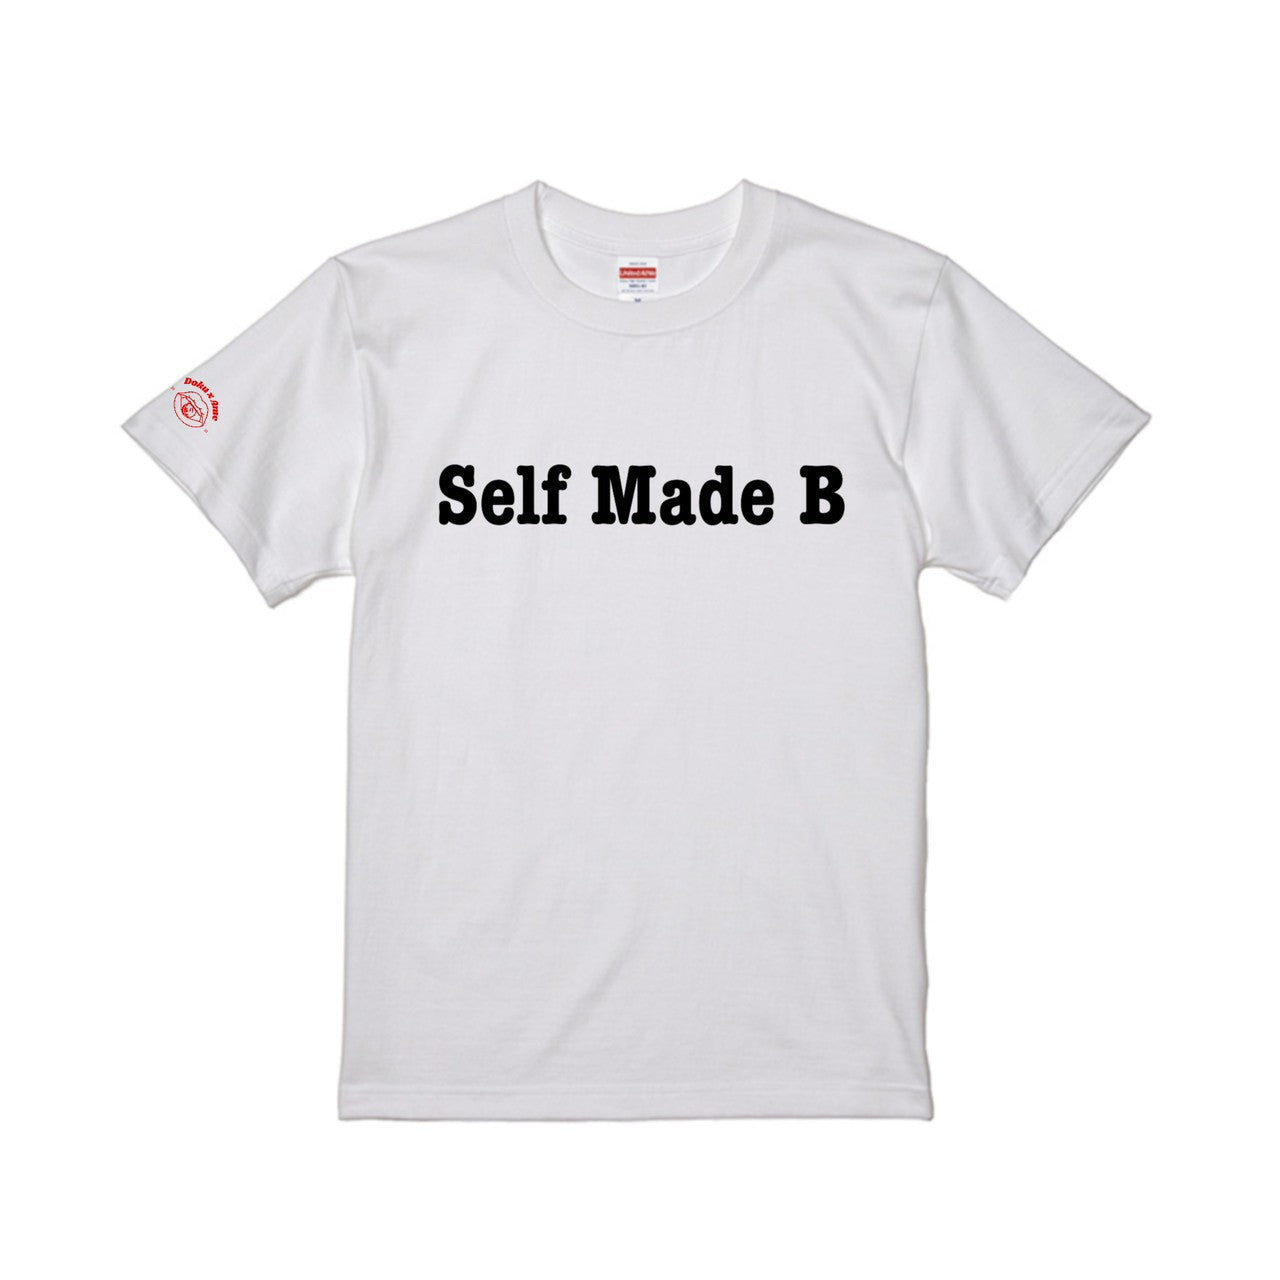 【BE:FIRST JUNON着用】　self made シャツ(最終値下げ)トップス